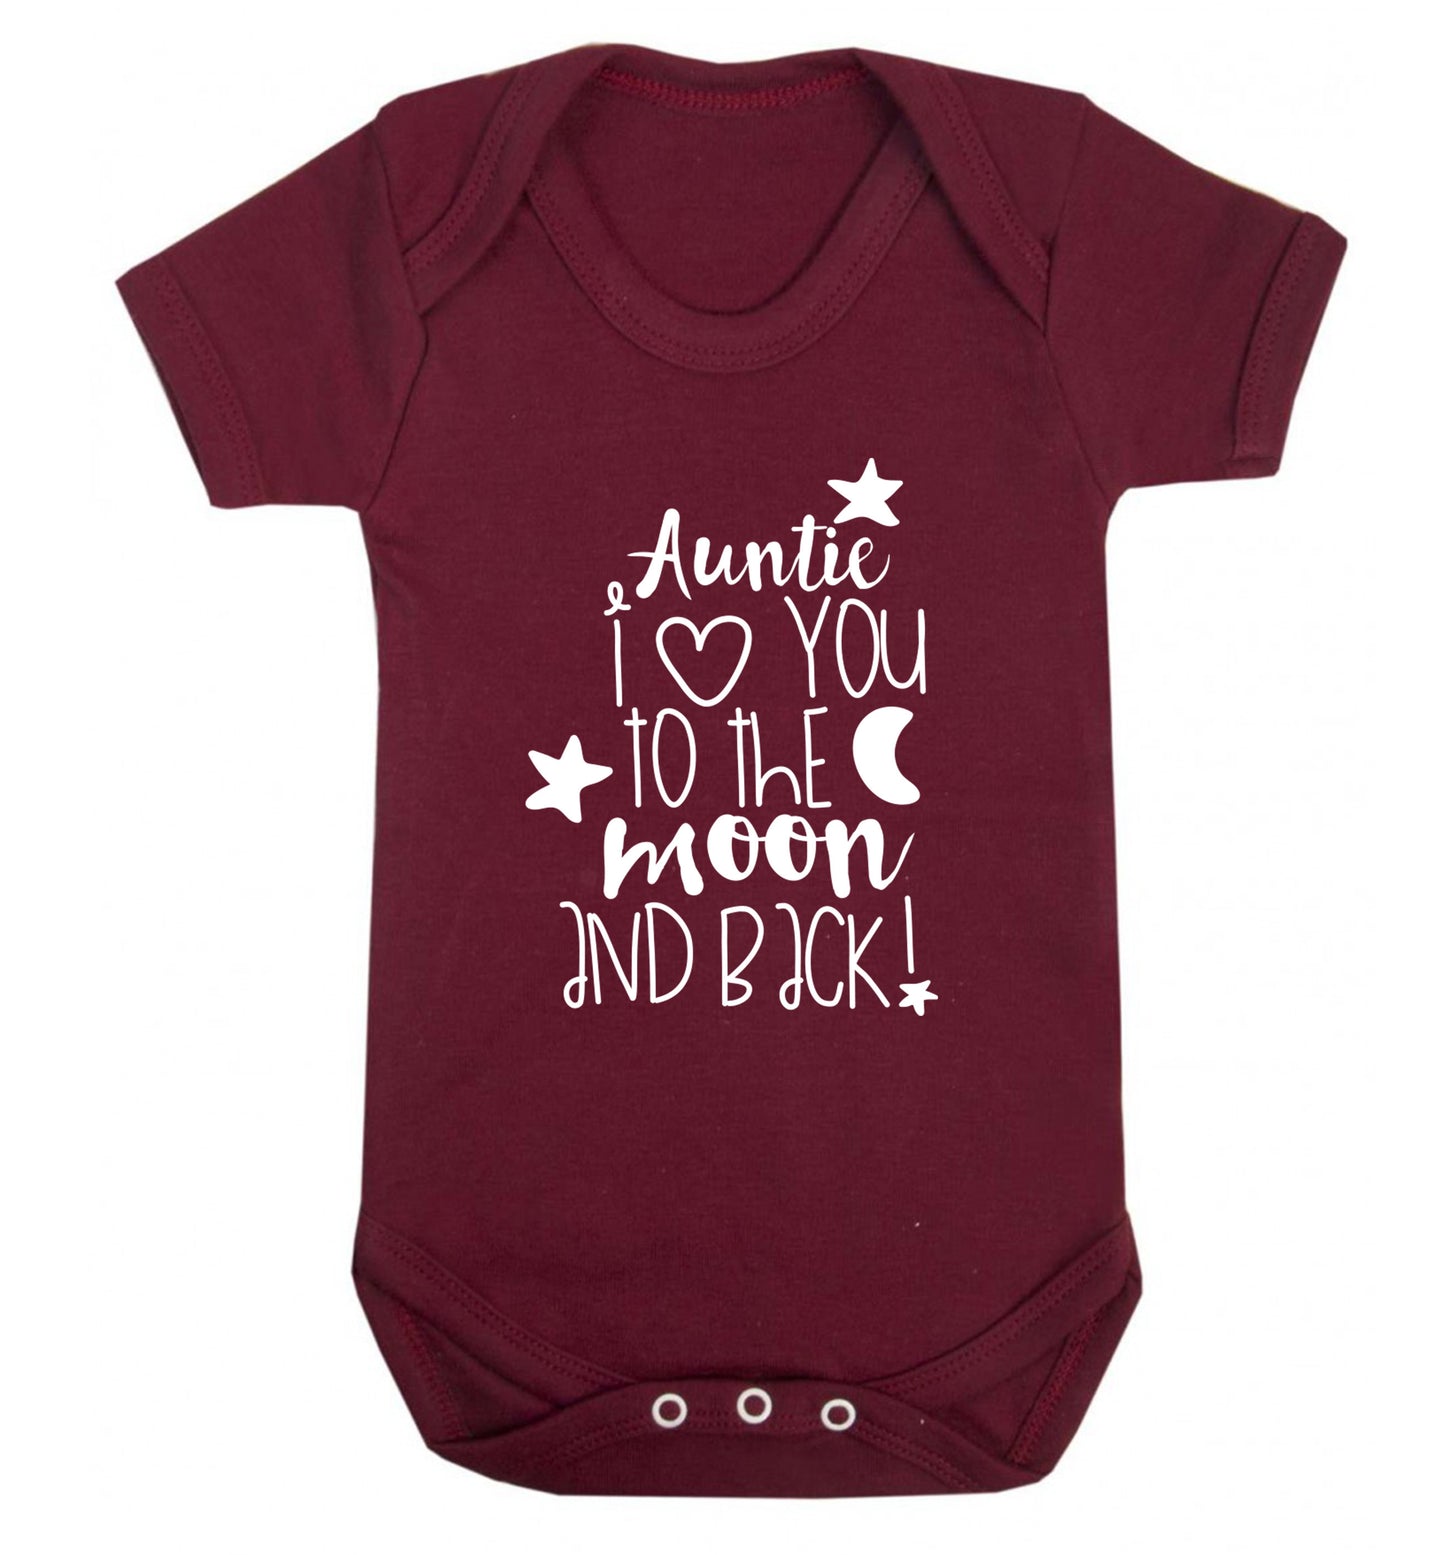 Auntie I love you to the moon and back Baby Vest maroon 18-24 months